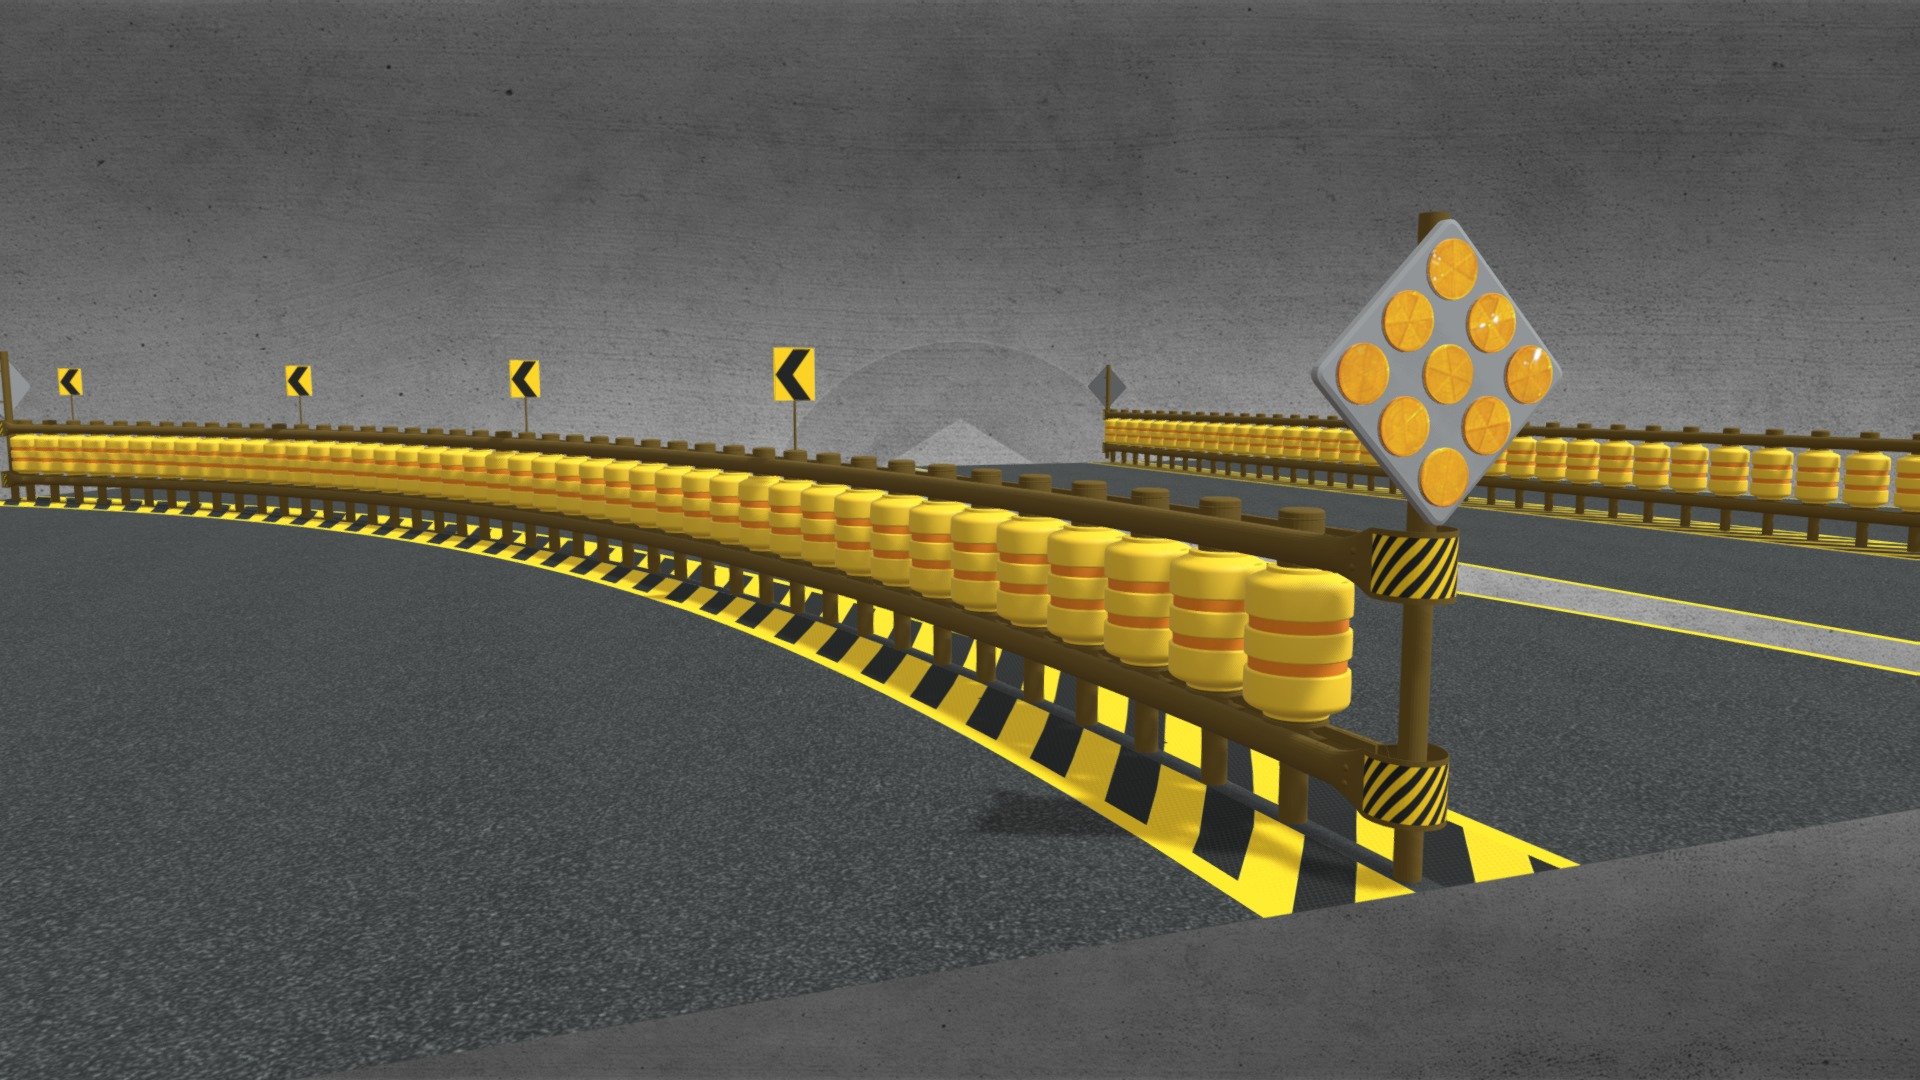 Rolling Barrier System Curved &amp; Straight
originally created with 3ds Max 2015 and rendered in Vray 3.0.

Total Poly Counts: 2 Pakage (Curved &amp; Straight)
Poly Count = 324516
Vertex Count = 332264

rolling barrier divider barricade city transport street road traffic light cityscape bus car truck crash vehicle highway roadway guardrail barrels - Rolling Barrier System Curved & Straight - 3D model by nuralam018 3d model